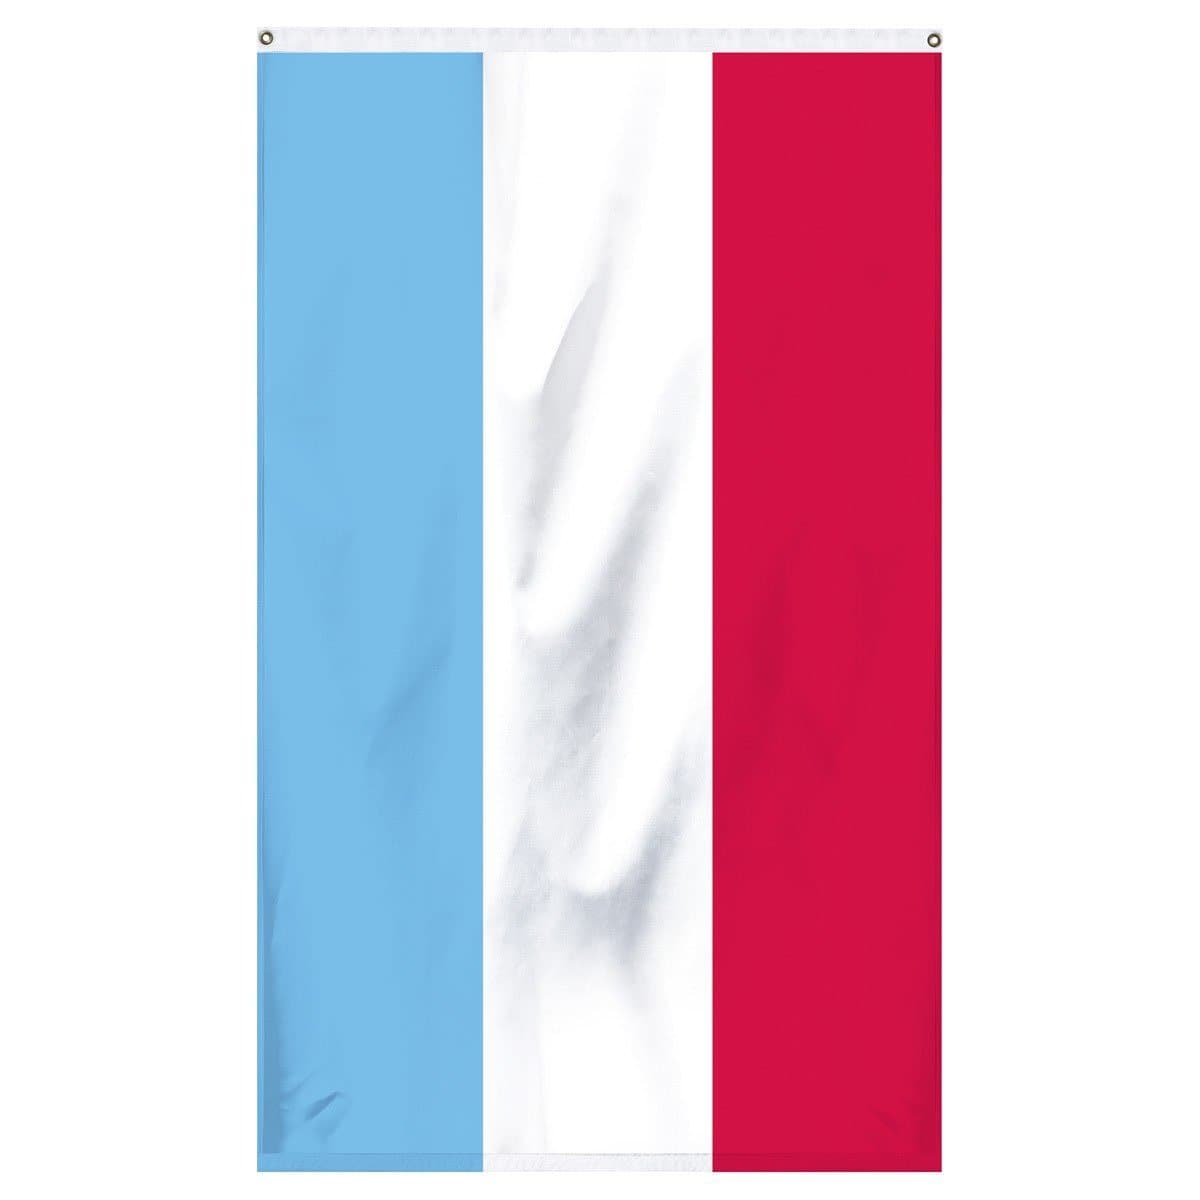 The national flag of Luxembourg for sale to buy online for flagpoles